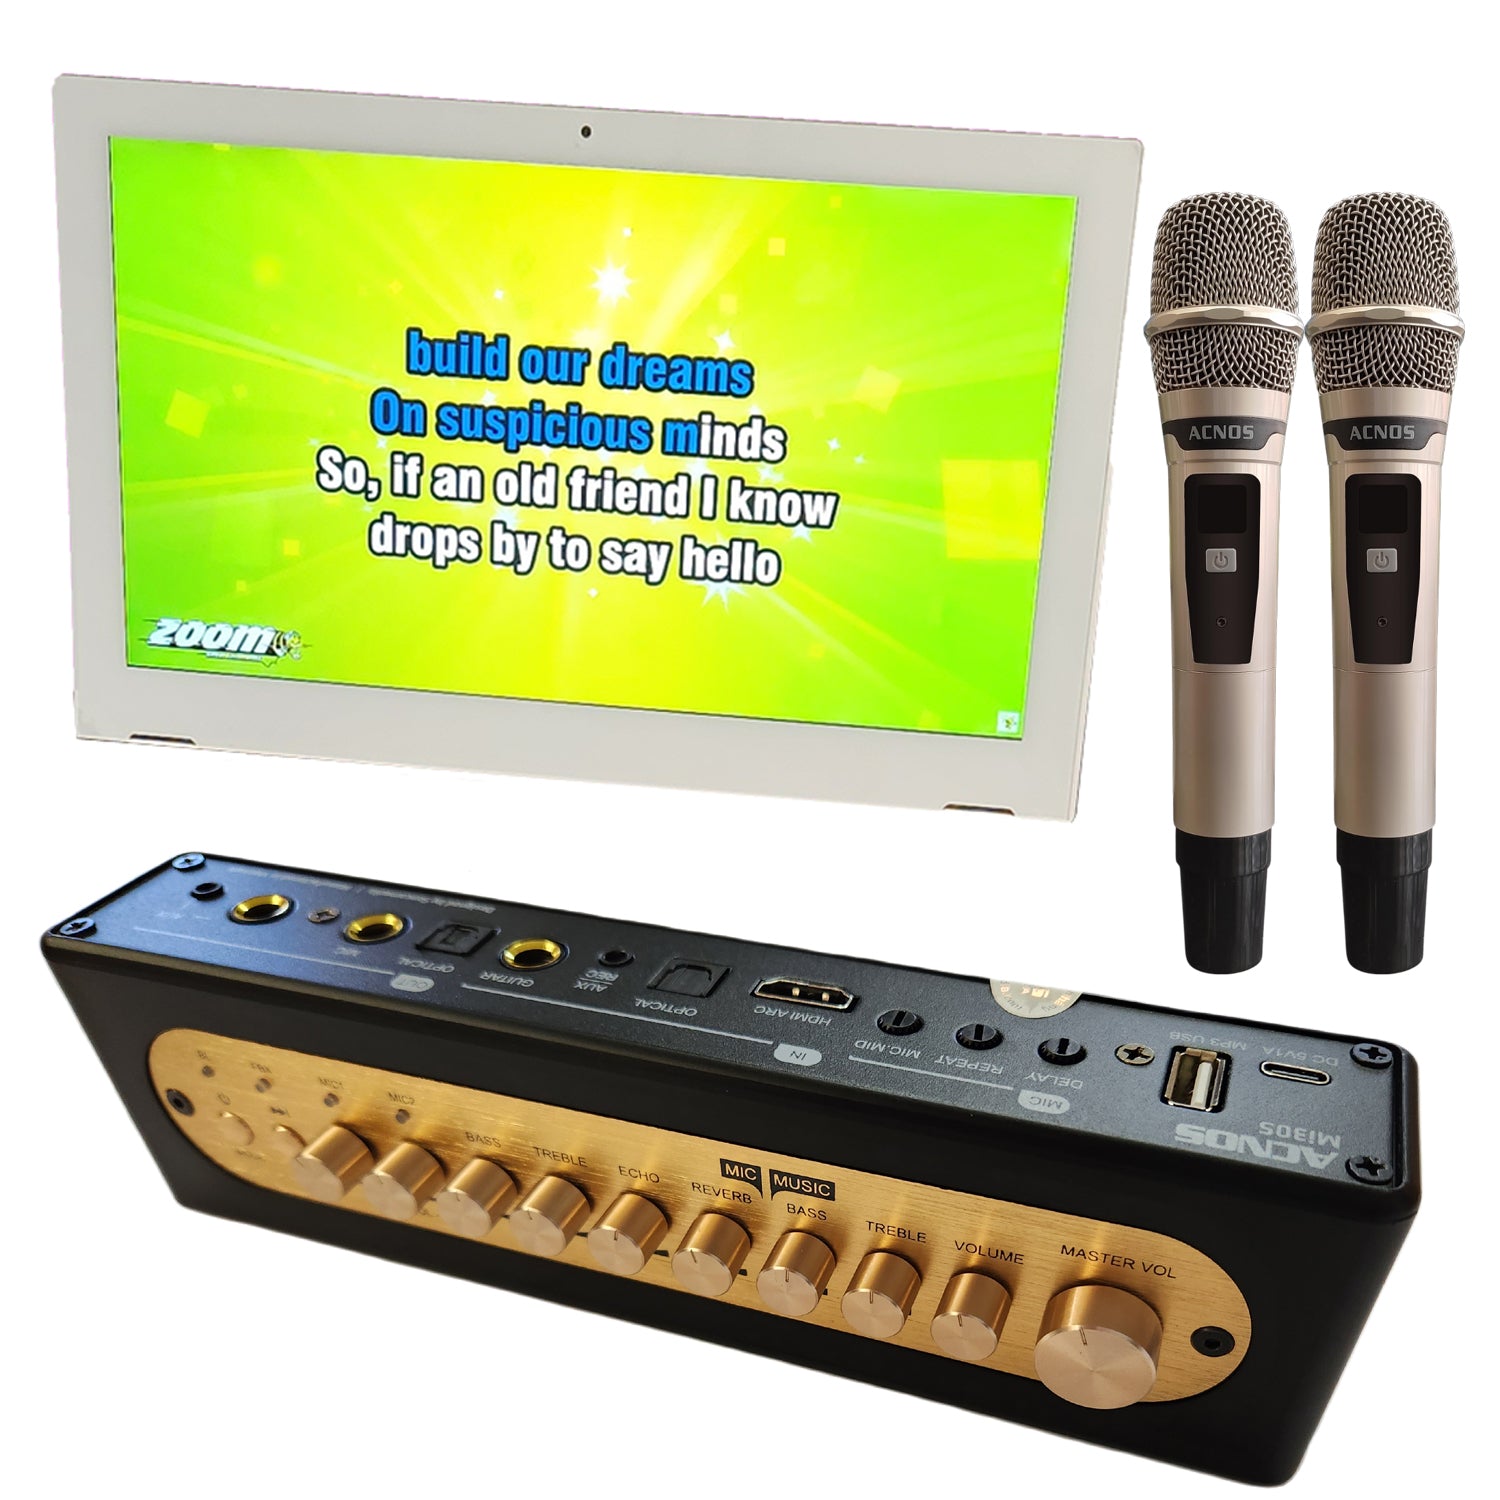 15.6" Karaoke Touch Screen System + ACNOS Mi - 30s Mixer (with 2 UHF Wireless Microphones) - Karaoke Home Entertainment